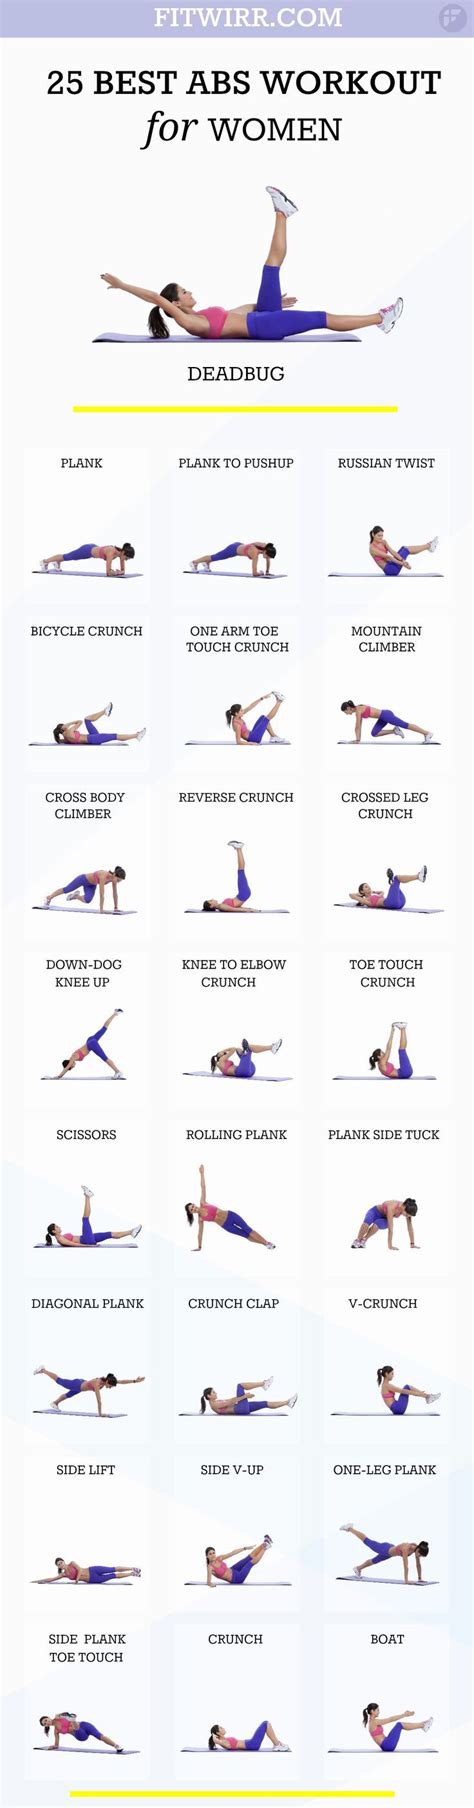 25 Best Ab Workouts For Women To Get A Flat Stomach Fitwirr Abs